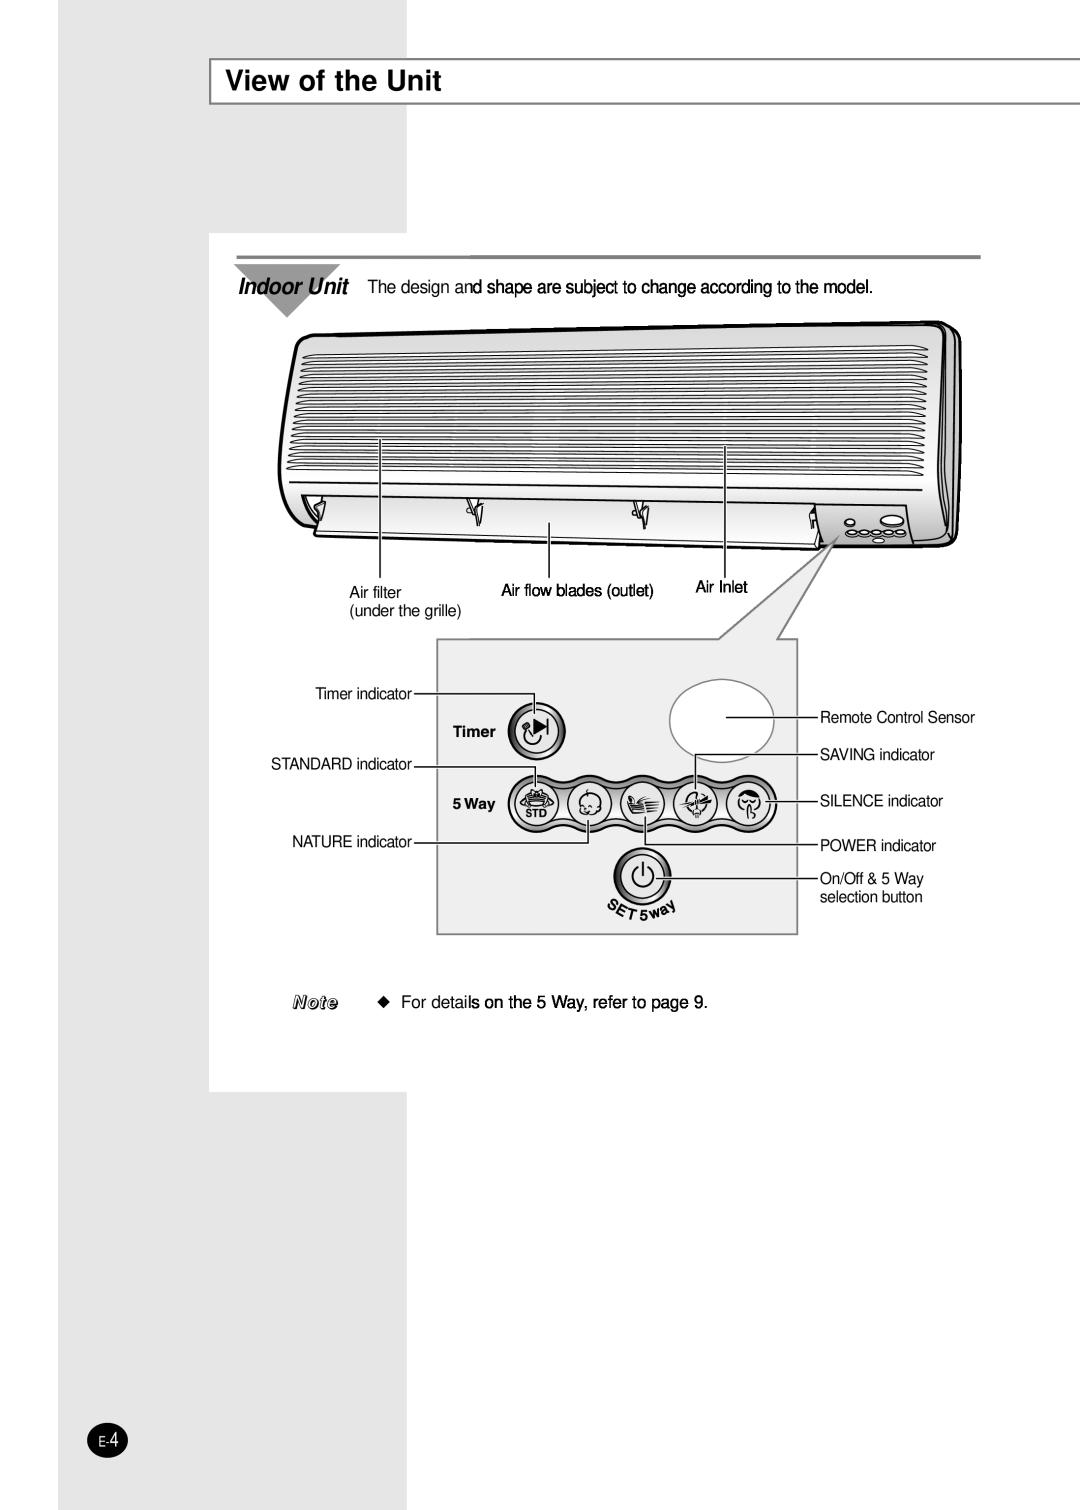 Samsung UQ12A2MD View of the Unit, Air filter, under the grille, Timer indicator STANDARD indicator, NATURE indicator 